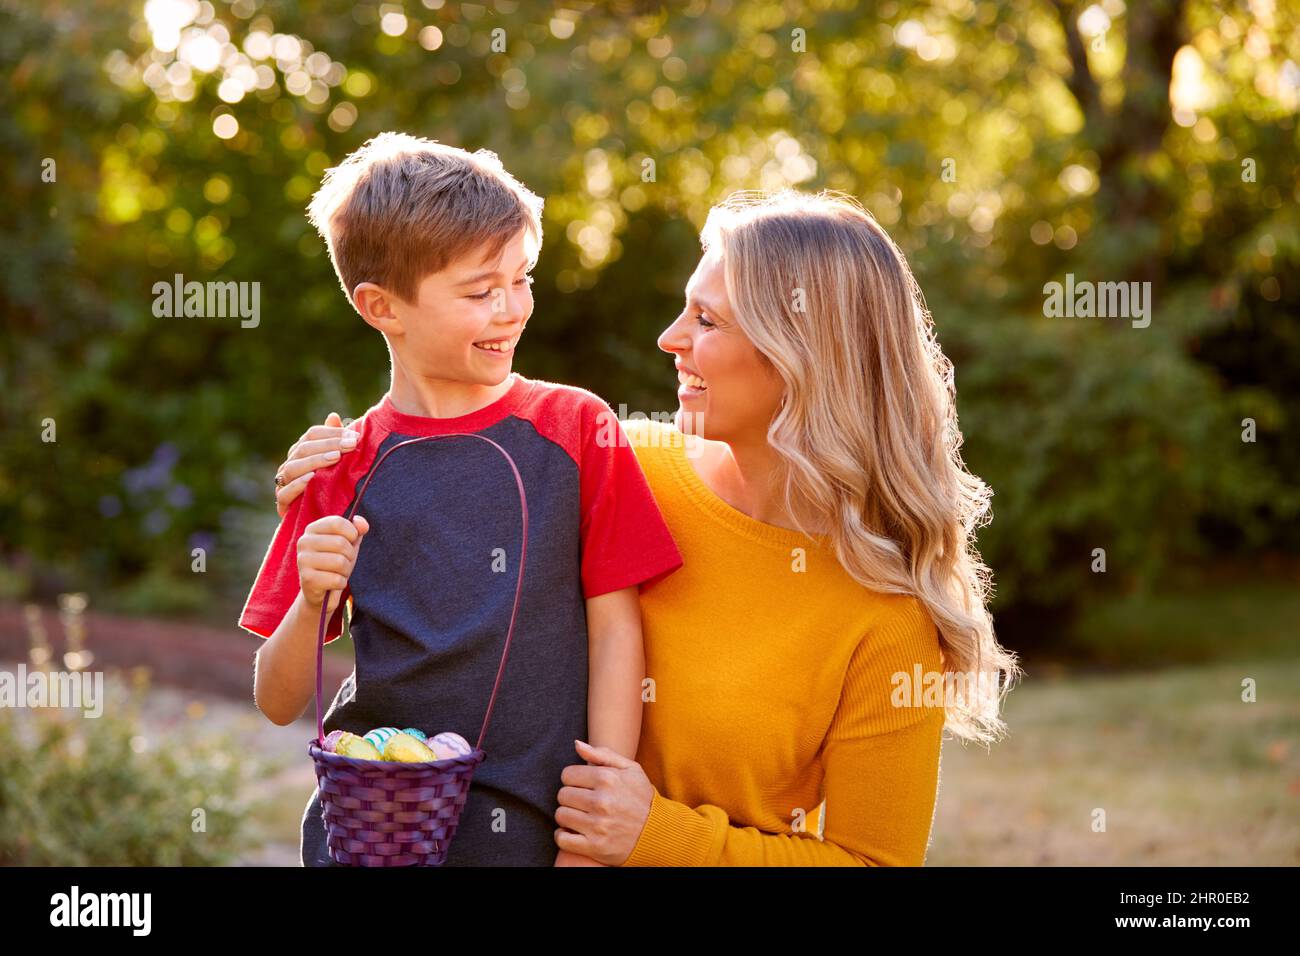 Smiling Mother And Son On Easter Egg Hunt Holding Basket Of Chocolate Eggs Wrapped In Foil Stock Photo